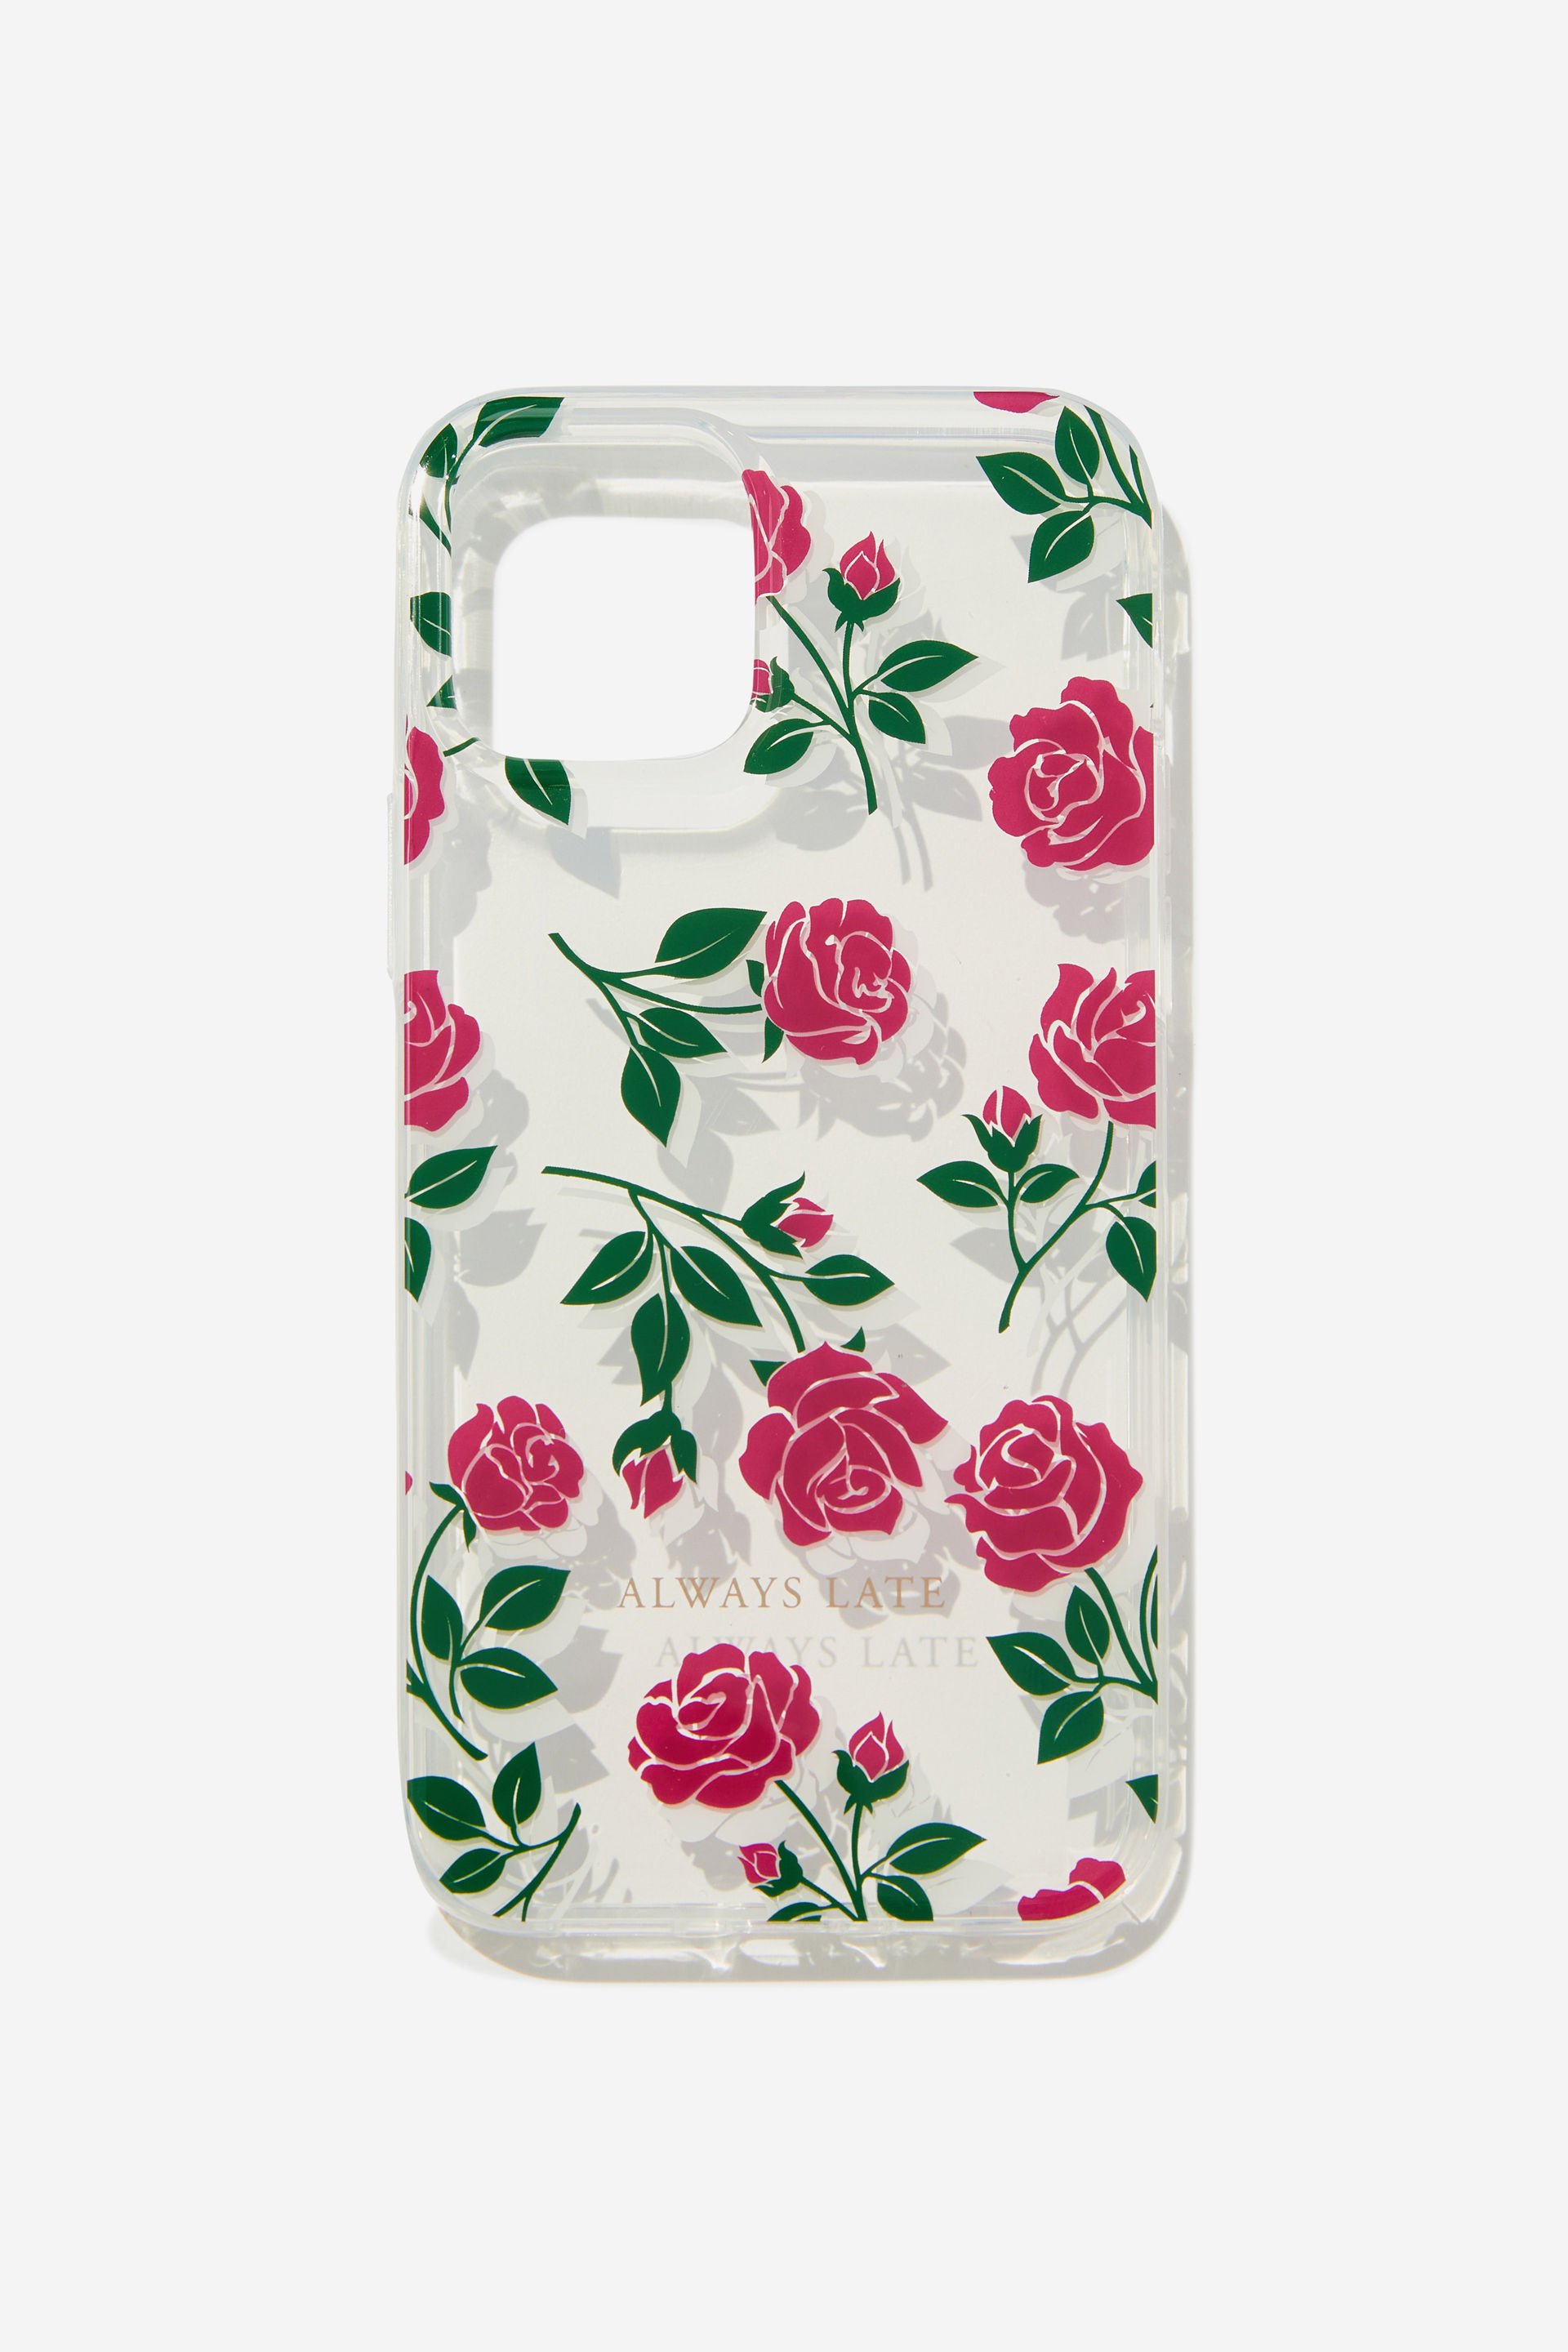 Typo - Graphic Phone Case Iphone 12-12 Pro - Always late roses / clear